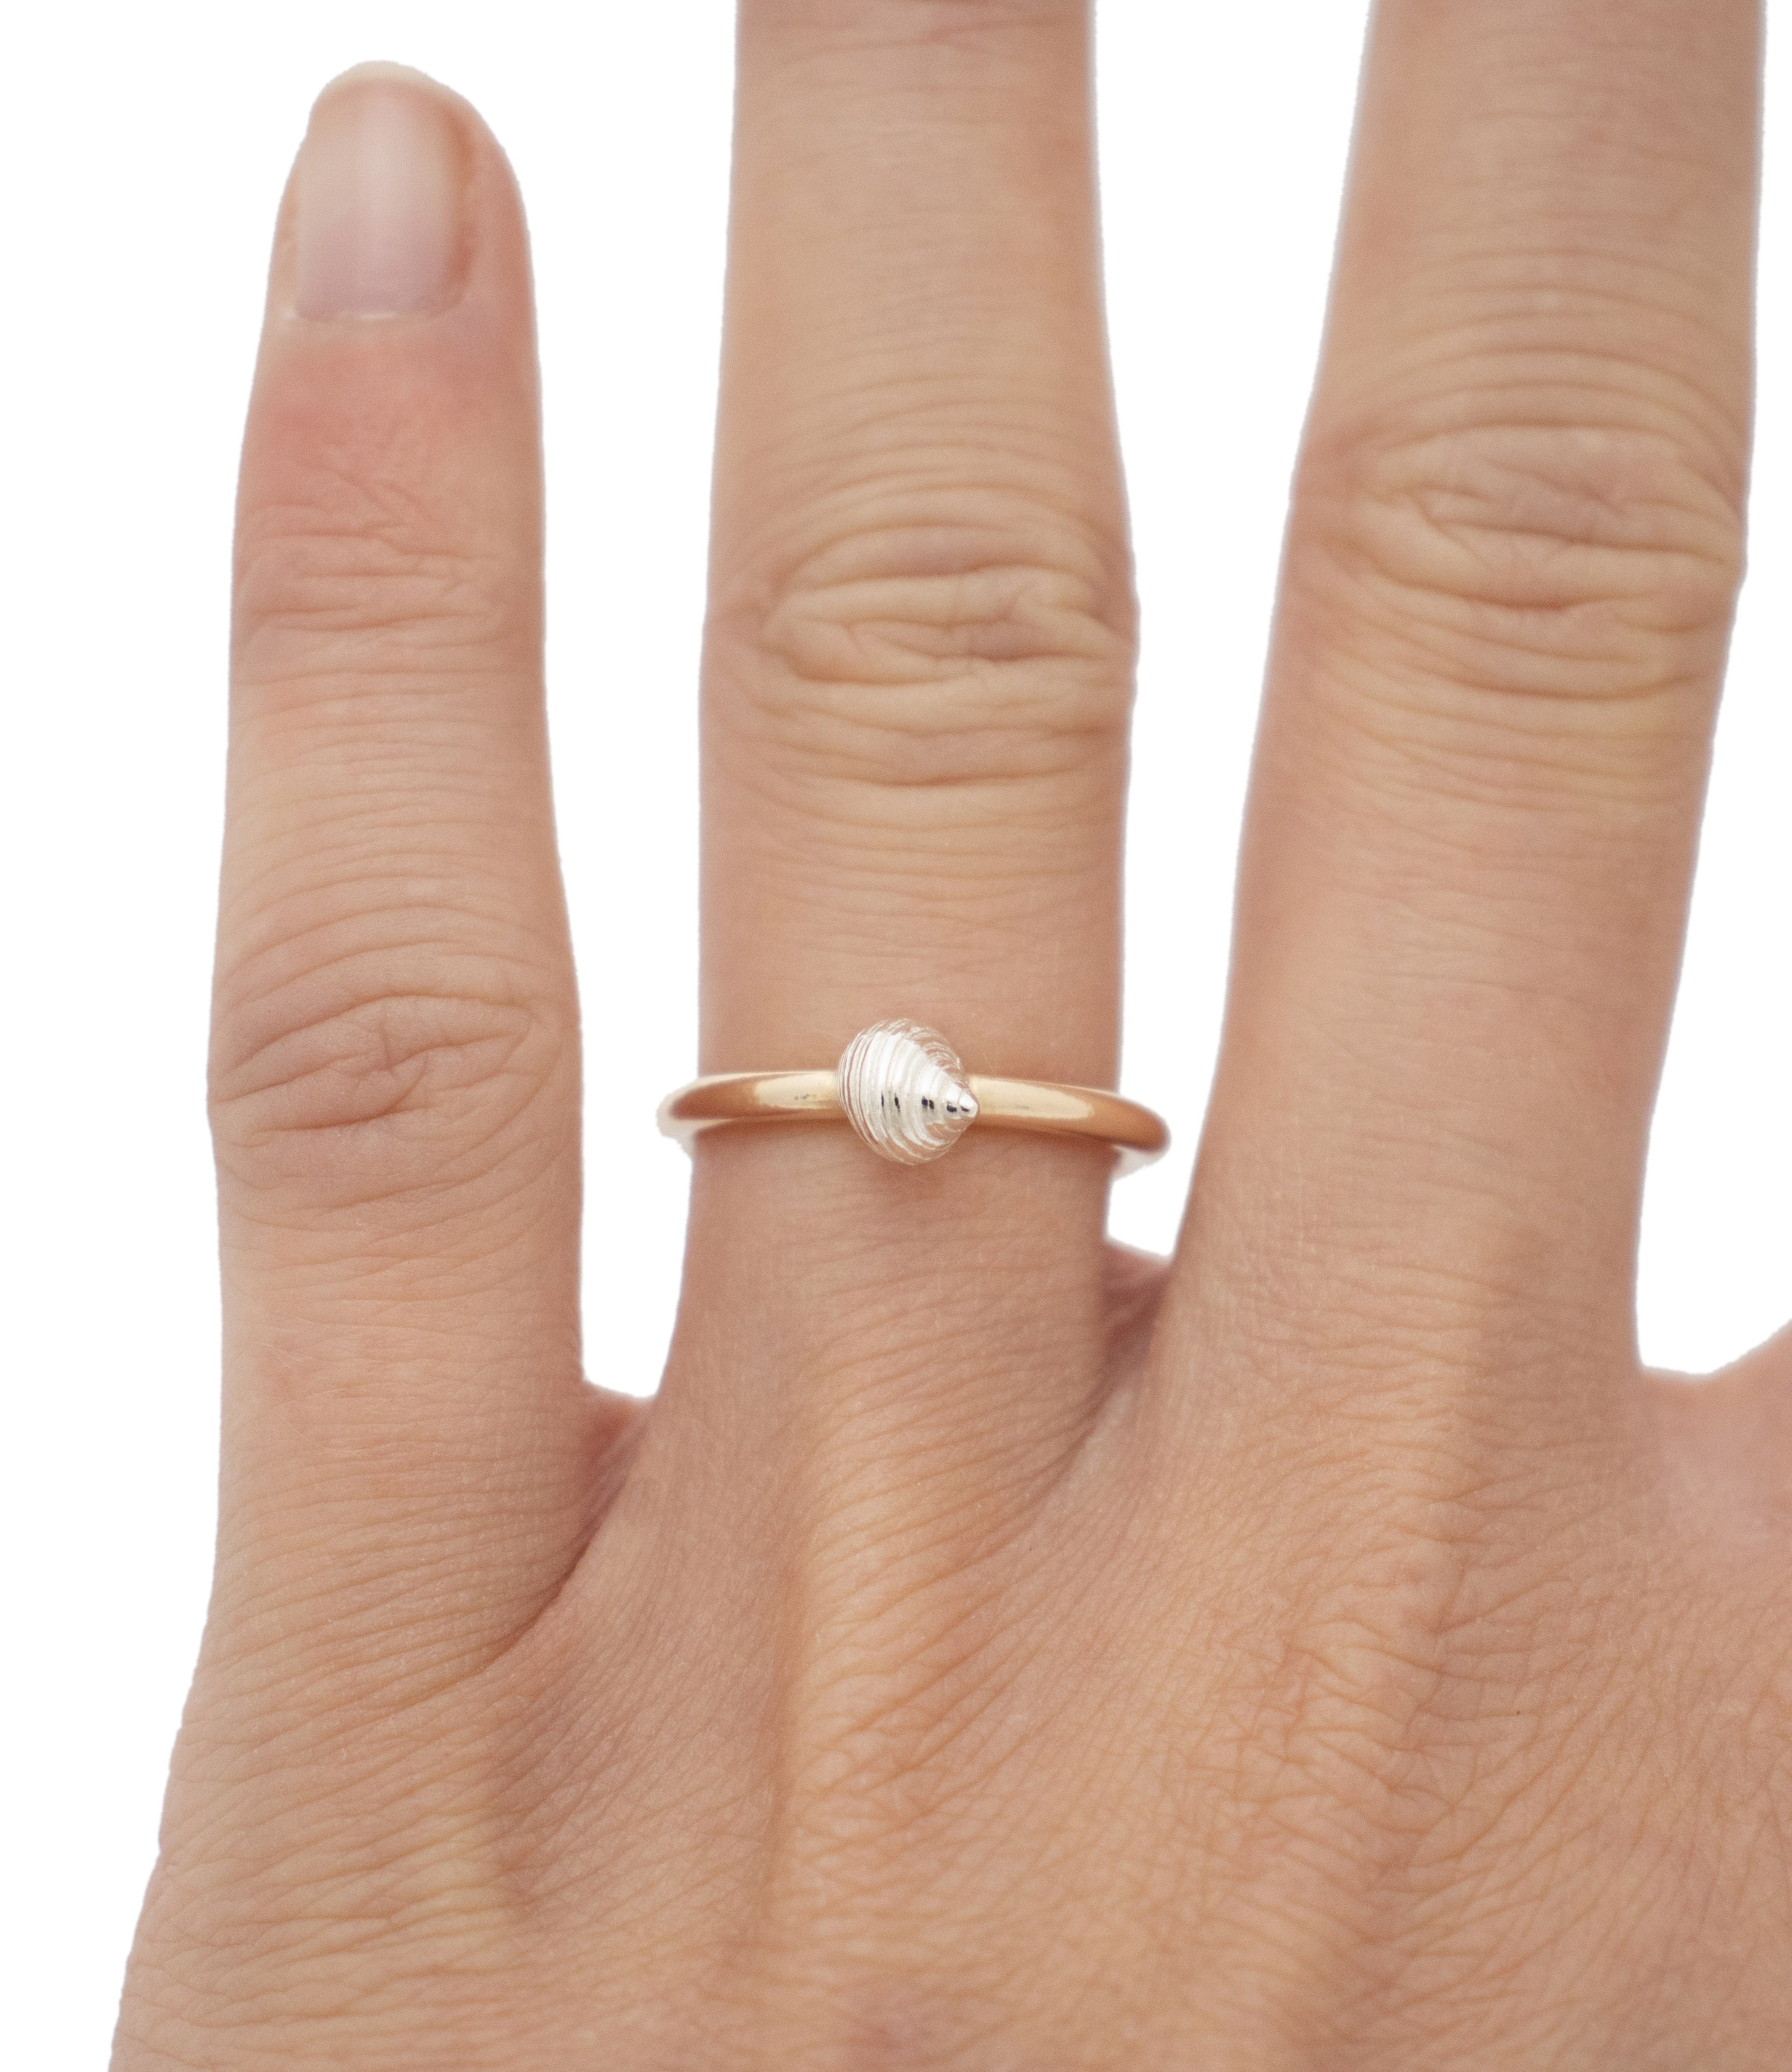 Port Isaac ring. Port Isaac shell. Port Isaac jewellery. Port Isaac Cornwall. Cornwall jewellery. Cornwall shell jewellery. Silver shell jewellery. Gold shell jewellery. Those Happy Places. Serena Ansell Jewellery.